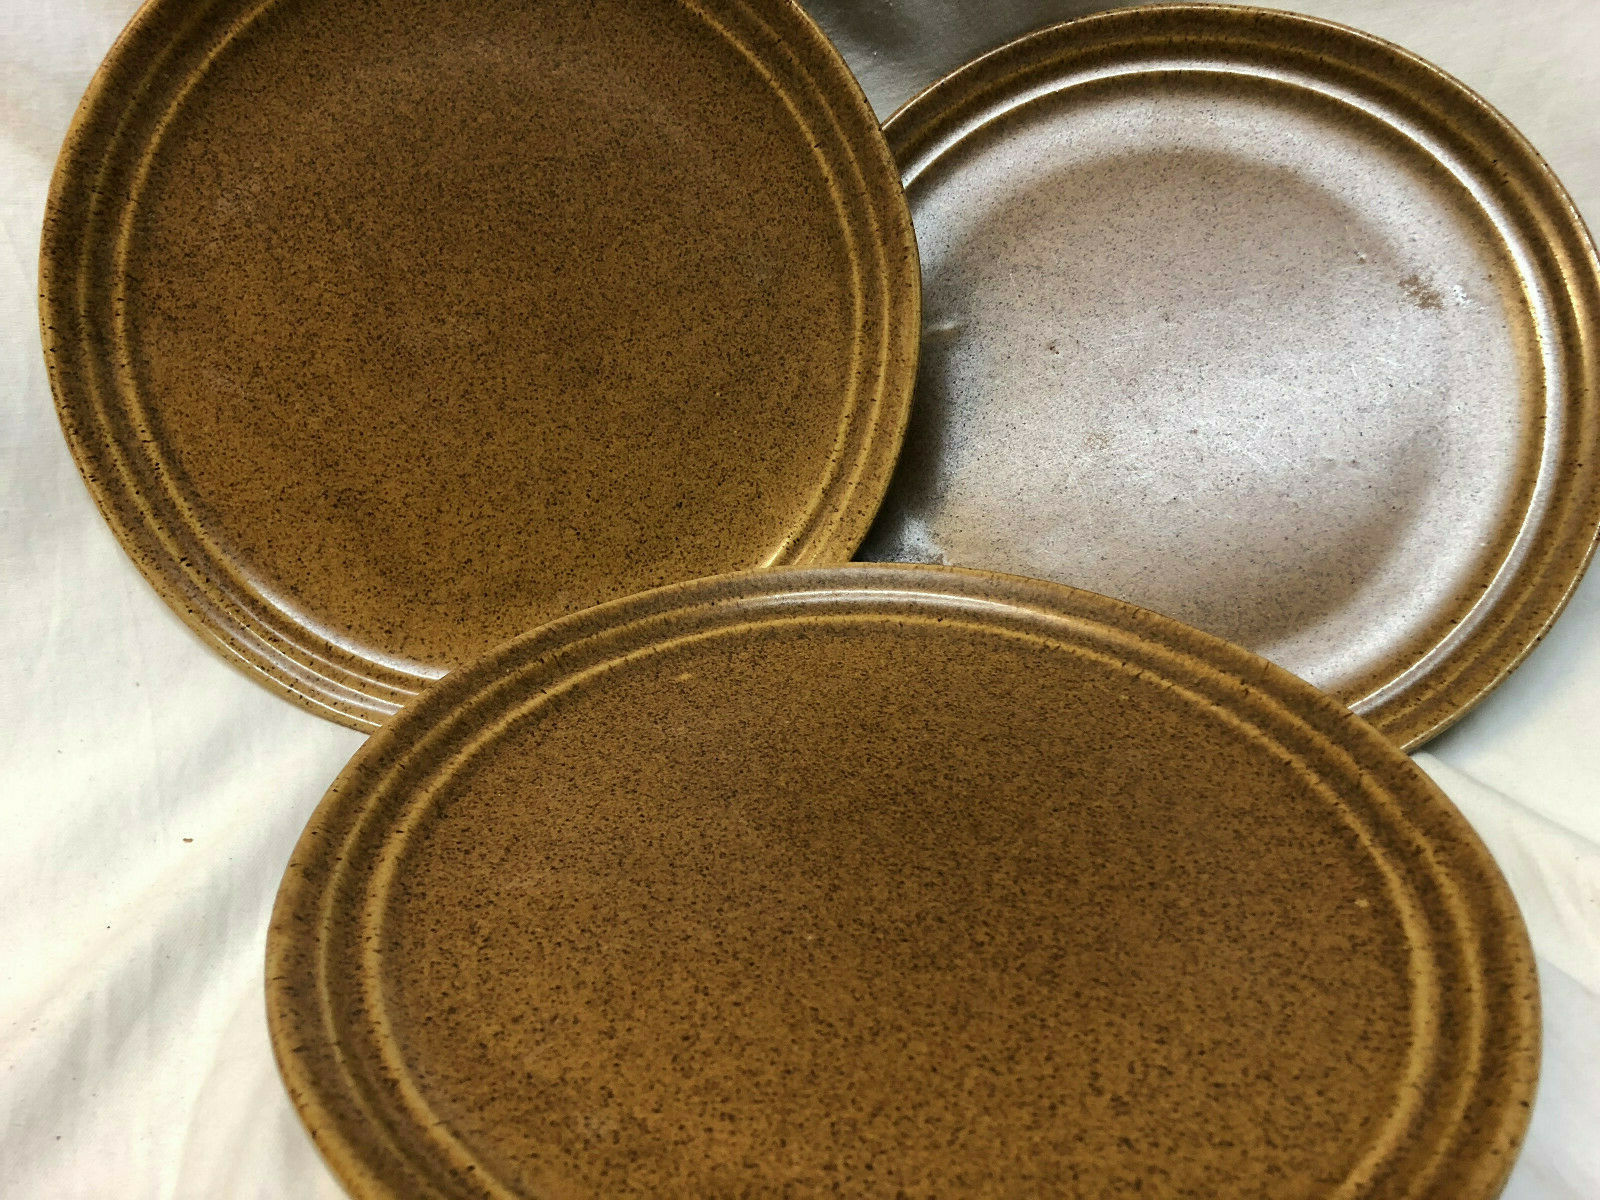 Monmouth Usa Mojave Set Of 3 Dinner Plates Speckled Brown Earthtones